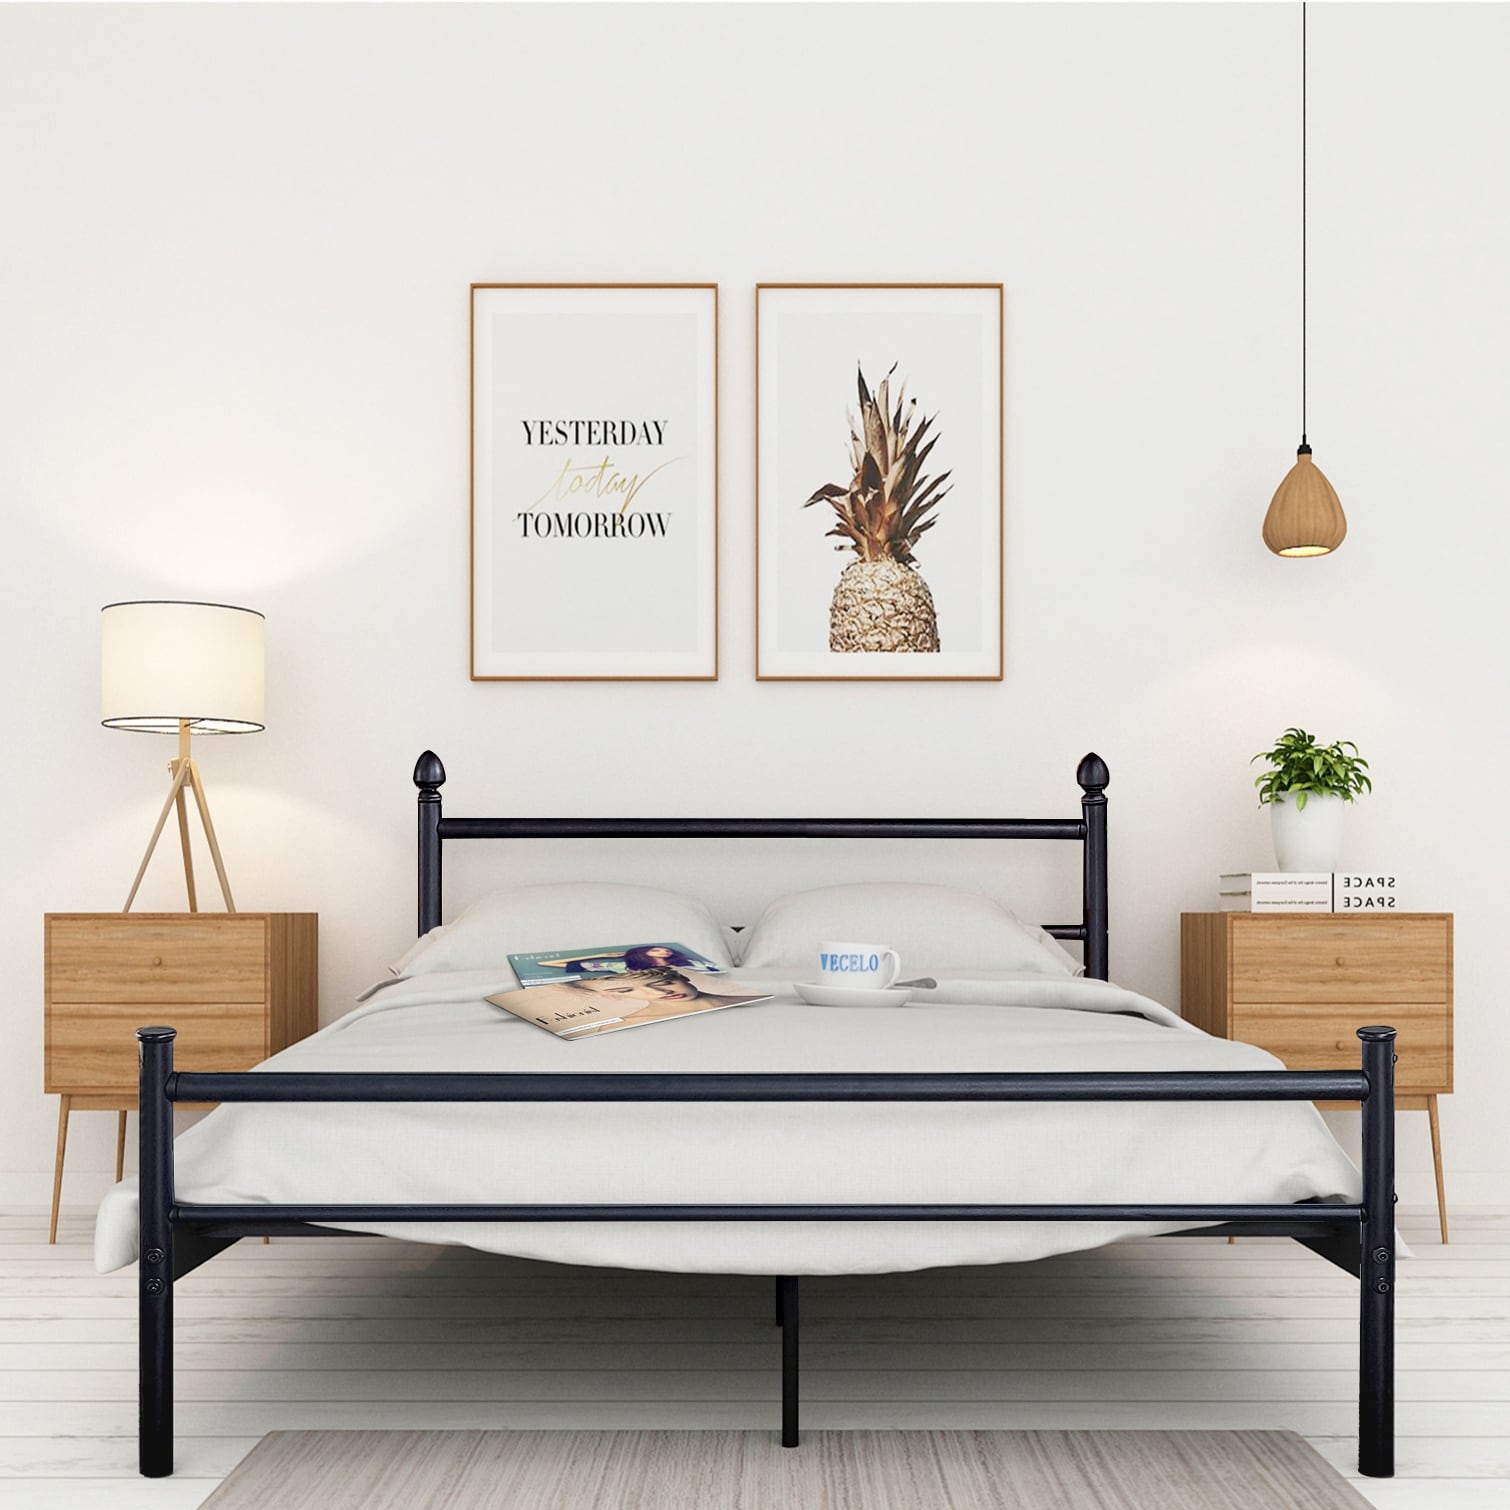 Mattress Foundation Strong Metal Slats Support Black /& Wood Grain No Box Spring Needed VECELO Platform Twin Bed Frame with Rustic Vintage Wood Headboard